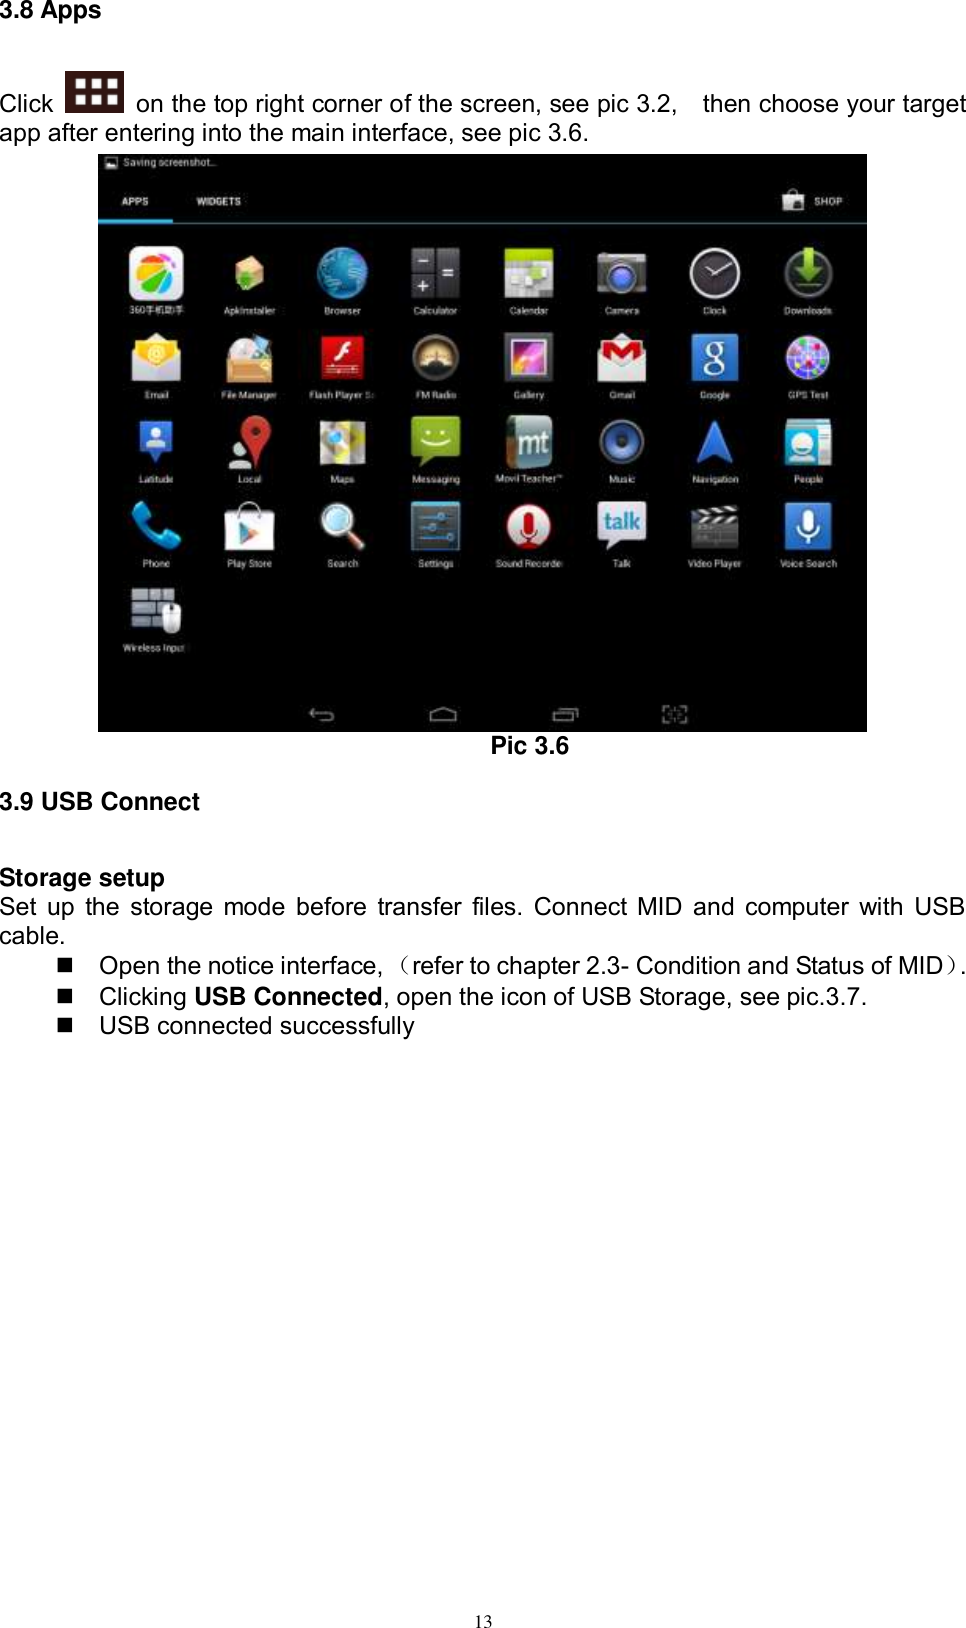      13 3.8 Apps Click    on the top right corner of the screen, see pic 3.2,    then choose your target app after entering into the main interface, see pic 3.6.  Pic 3.6 3.9 USB Connect Storage setup Set up the storage mode before transfer files. Connect MID and computer with USB cable.   Open the notice interface, （refer to chapter 2.3- Condition and Status of MID）.     Clicking USB Connected, open the icon of USB Storage, see pic.3.7.   USB connected successfully   